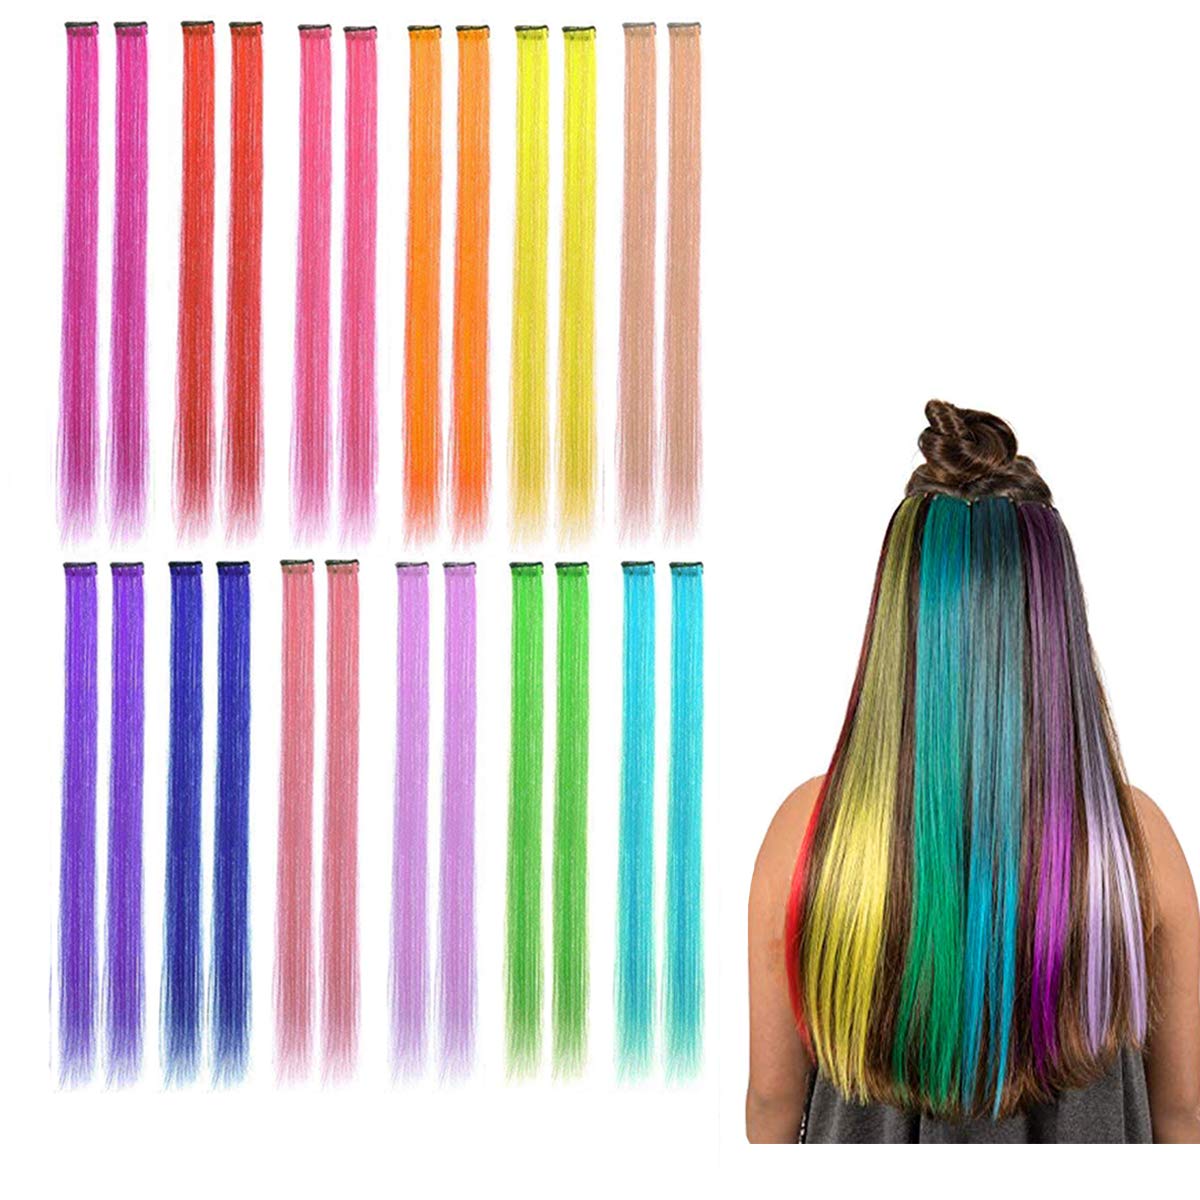 Kyerivs Colored Clip in Hair Extensions 24 PCS 12 Colors Rainbow Heat-Resistant Straight Highlight Hairpieces Cospaly Fashion Party Christmas Gift For Kids Girls - 20inch